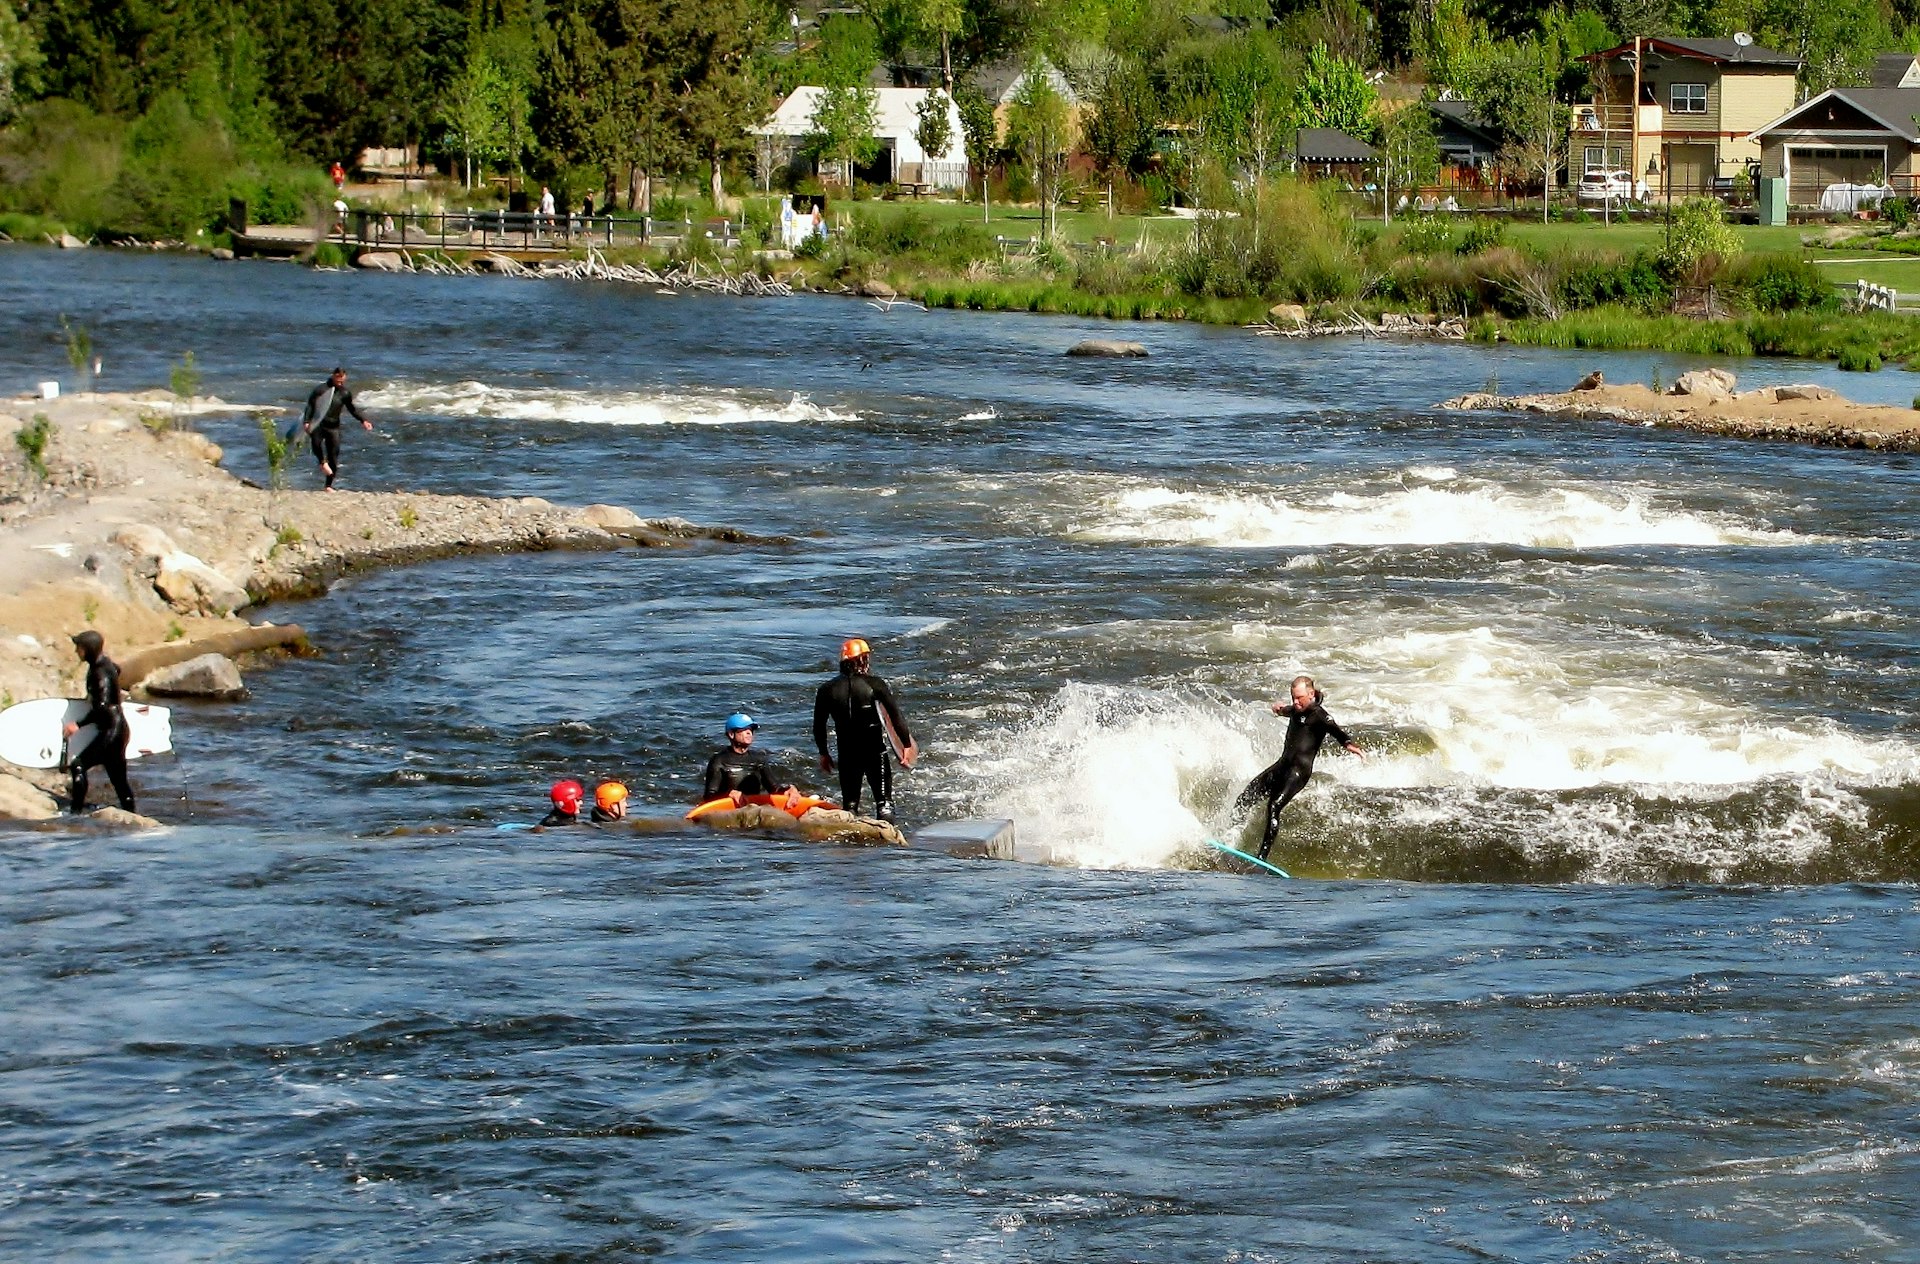 A group of people river surfs on the Deschutes River